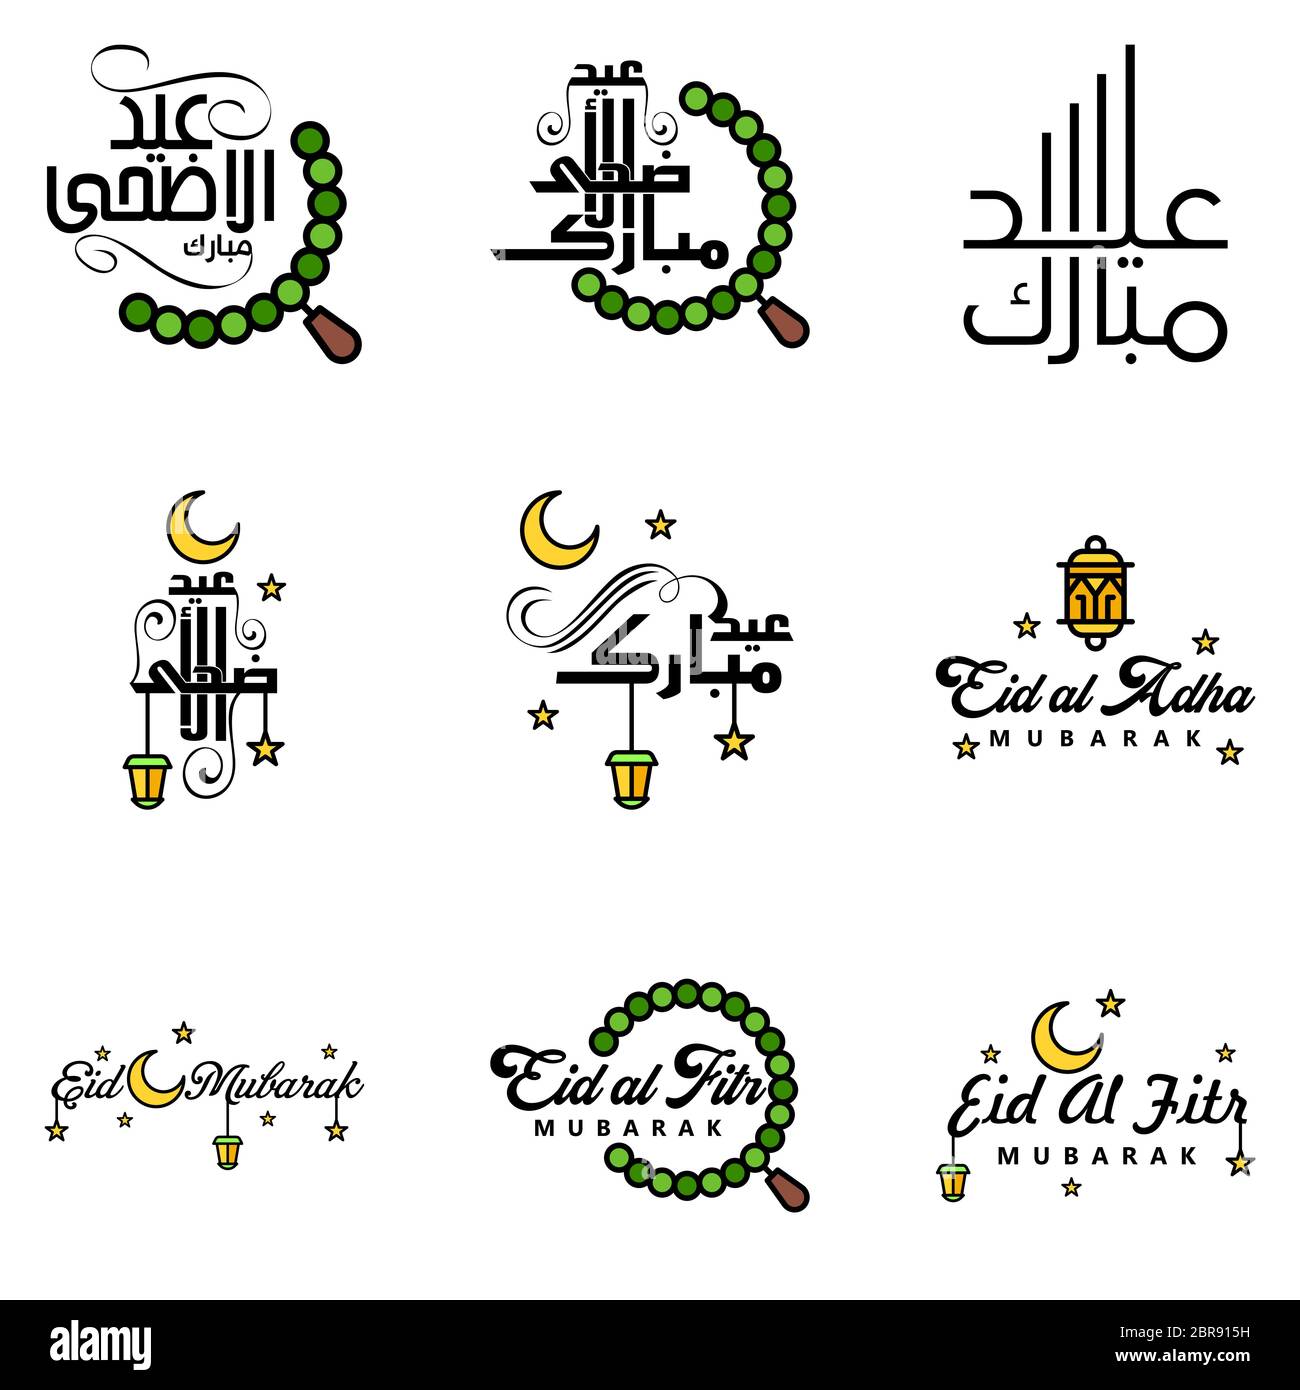 Eid Mubarak Pack Of 9 Islamic Designs With Arabic Calligraphy And ...